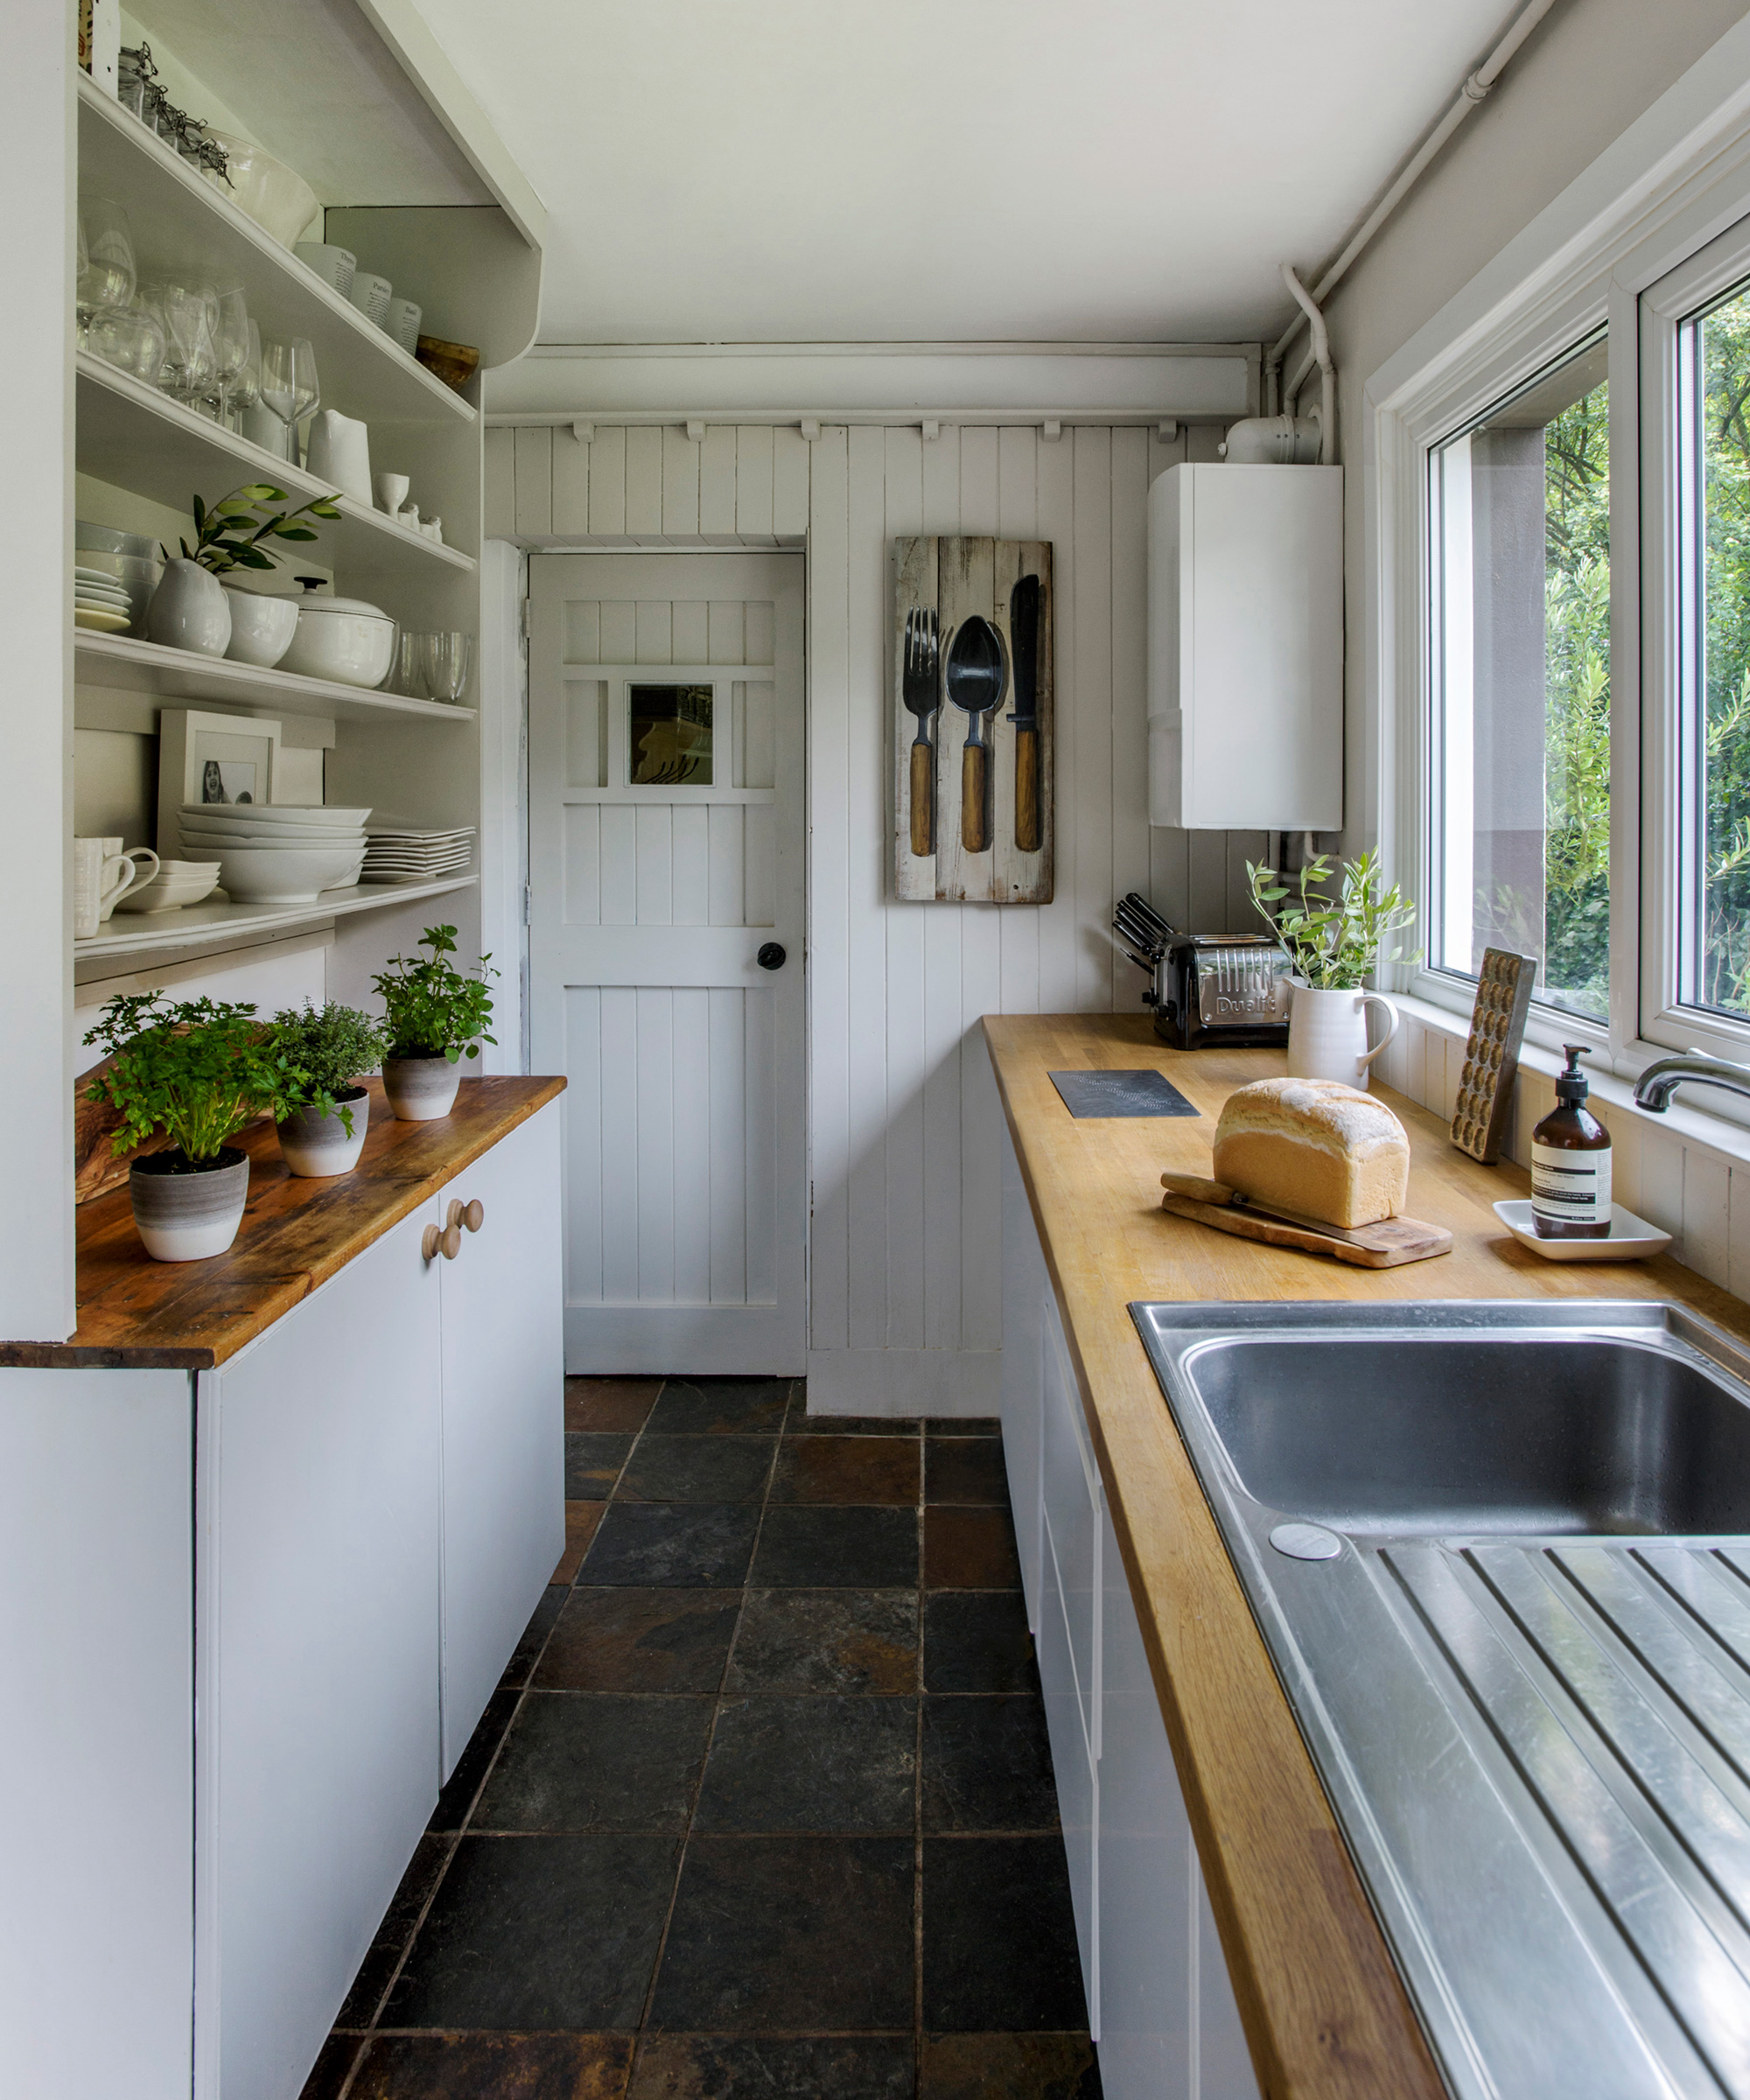 Galley kitchen ideas: 12 kitchen layouts that maximize space | Homes ...